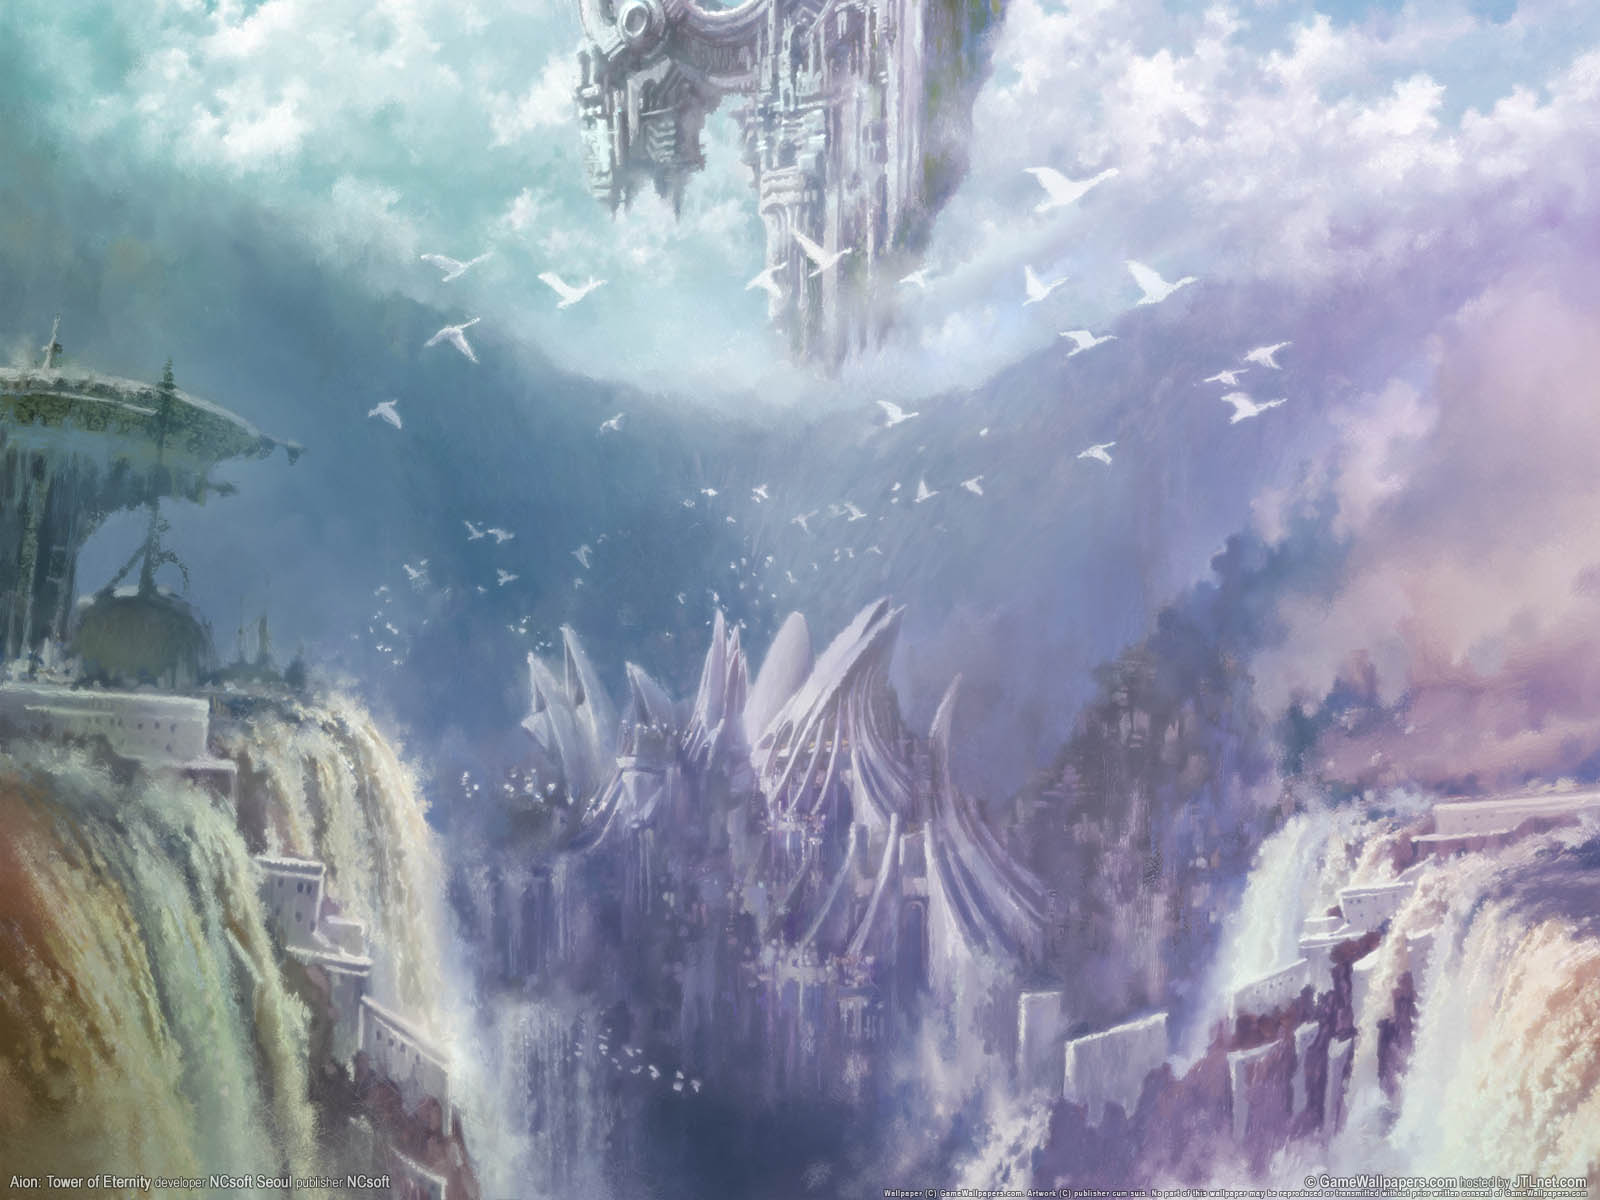 Aion%3A Tower of Eternity achtergrond 07 1600x1200